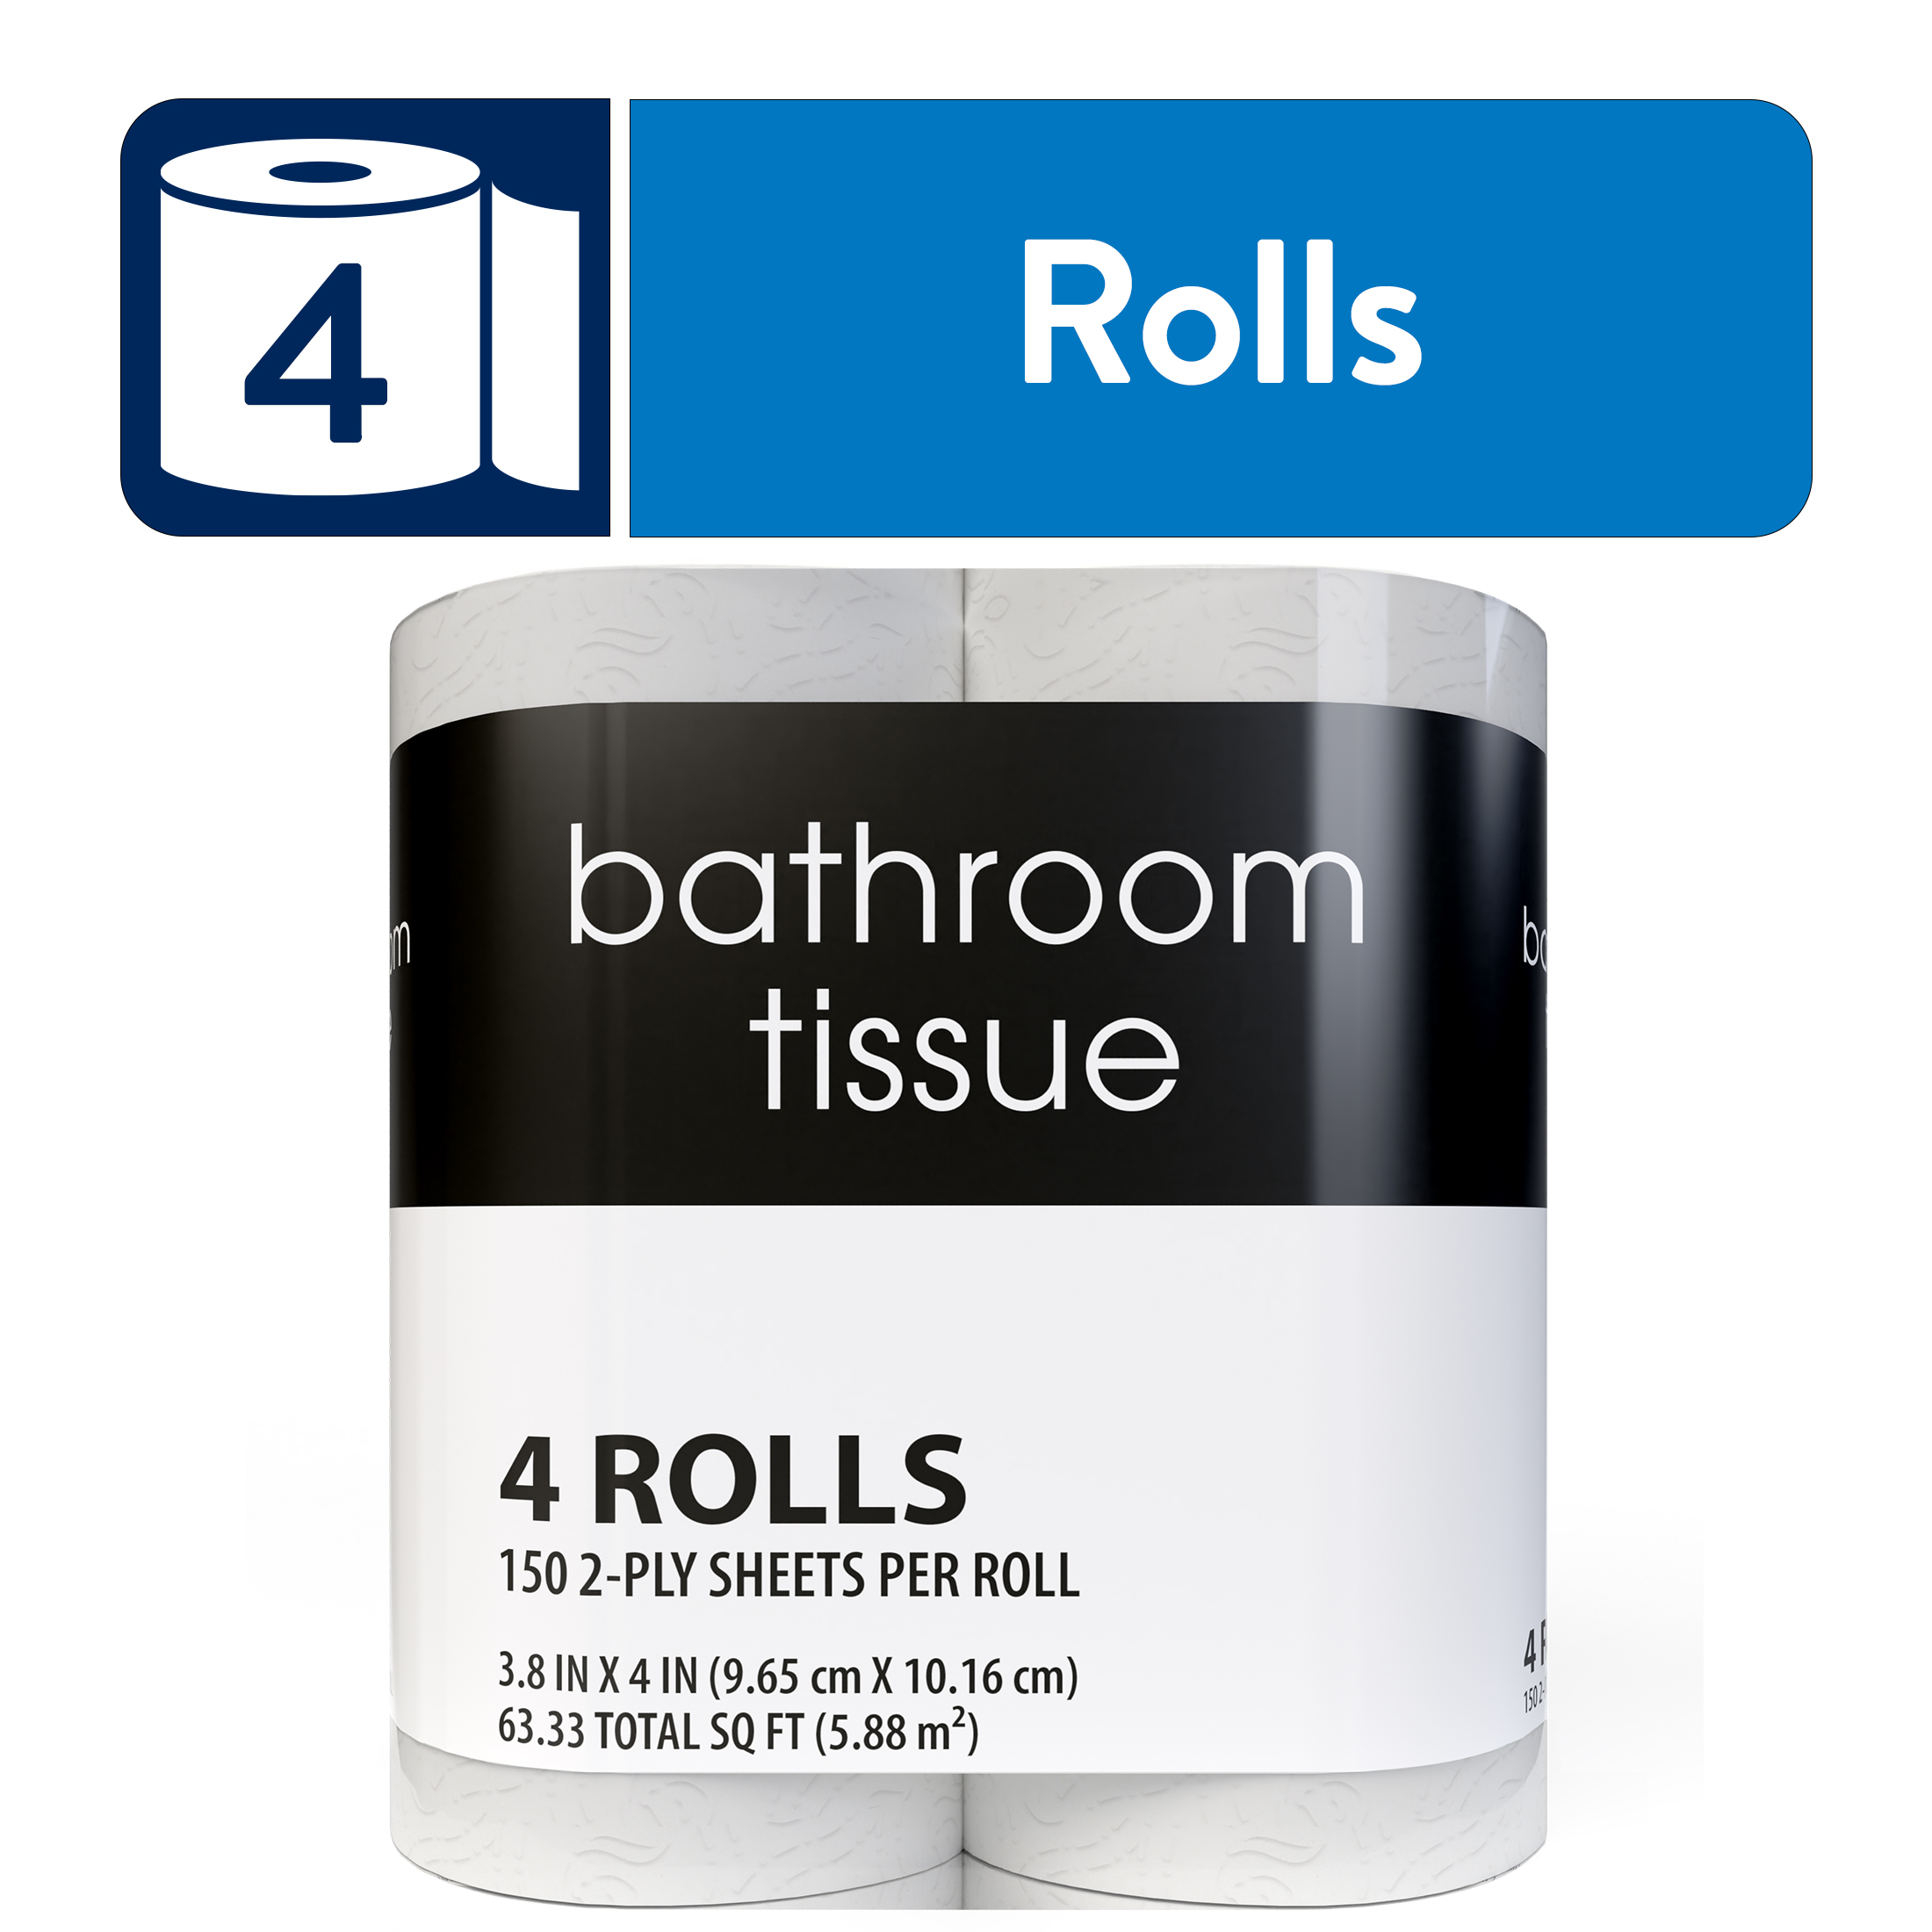 Toilet Paper, 4 Rolls, 150 2-Ply Sheets per Roll - image 1 of 4